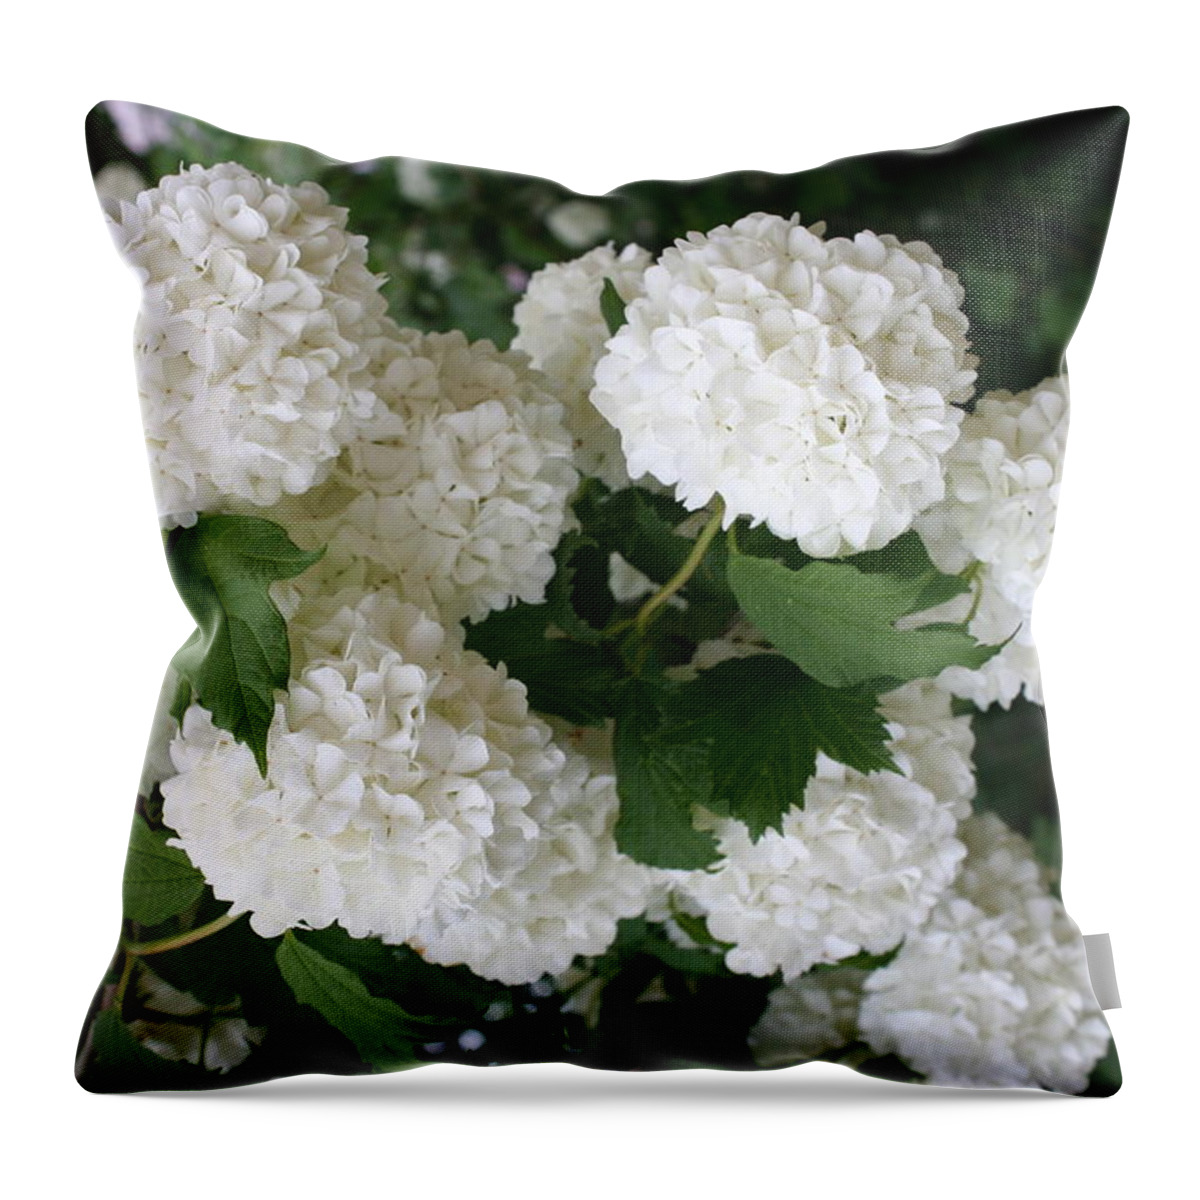 White Snowball Throw Pillow featuring the photograph White Snowball Bush by Christiane Schulze Art And Photography